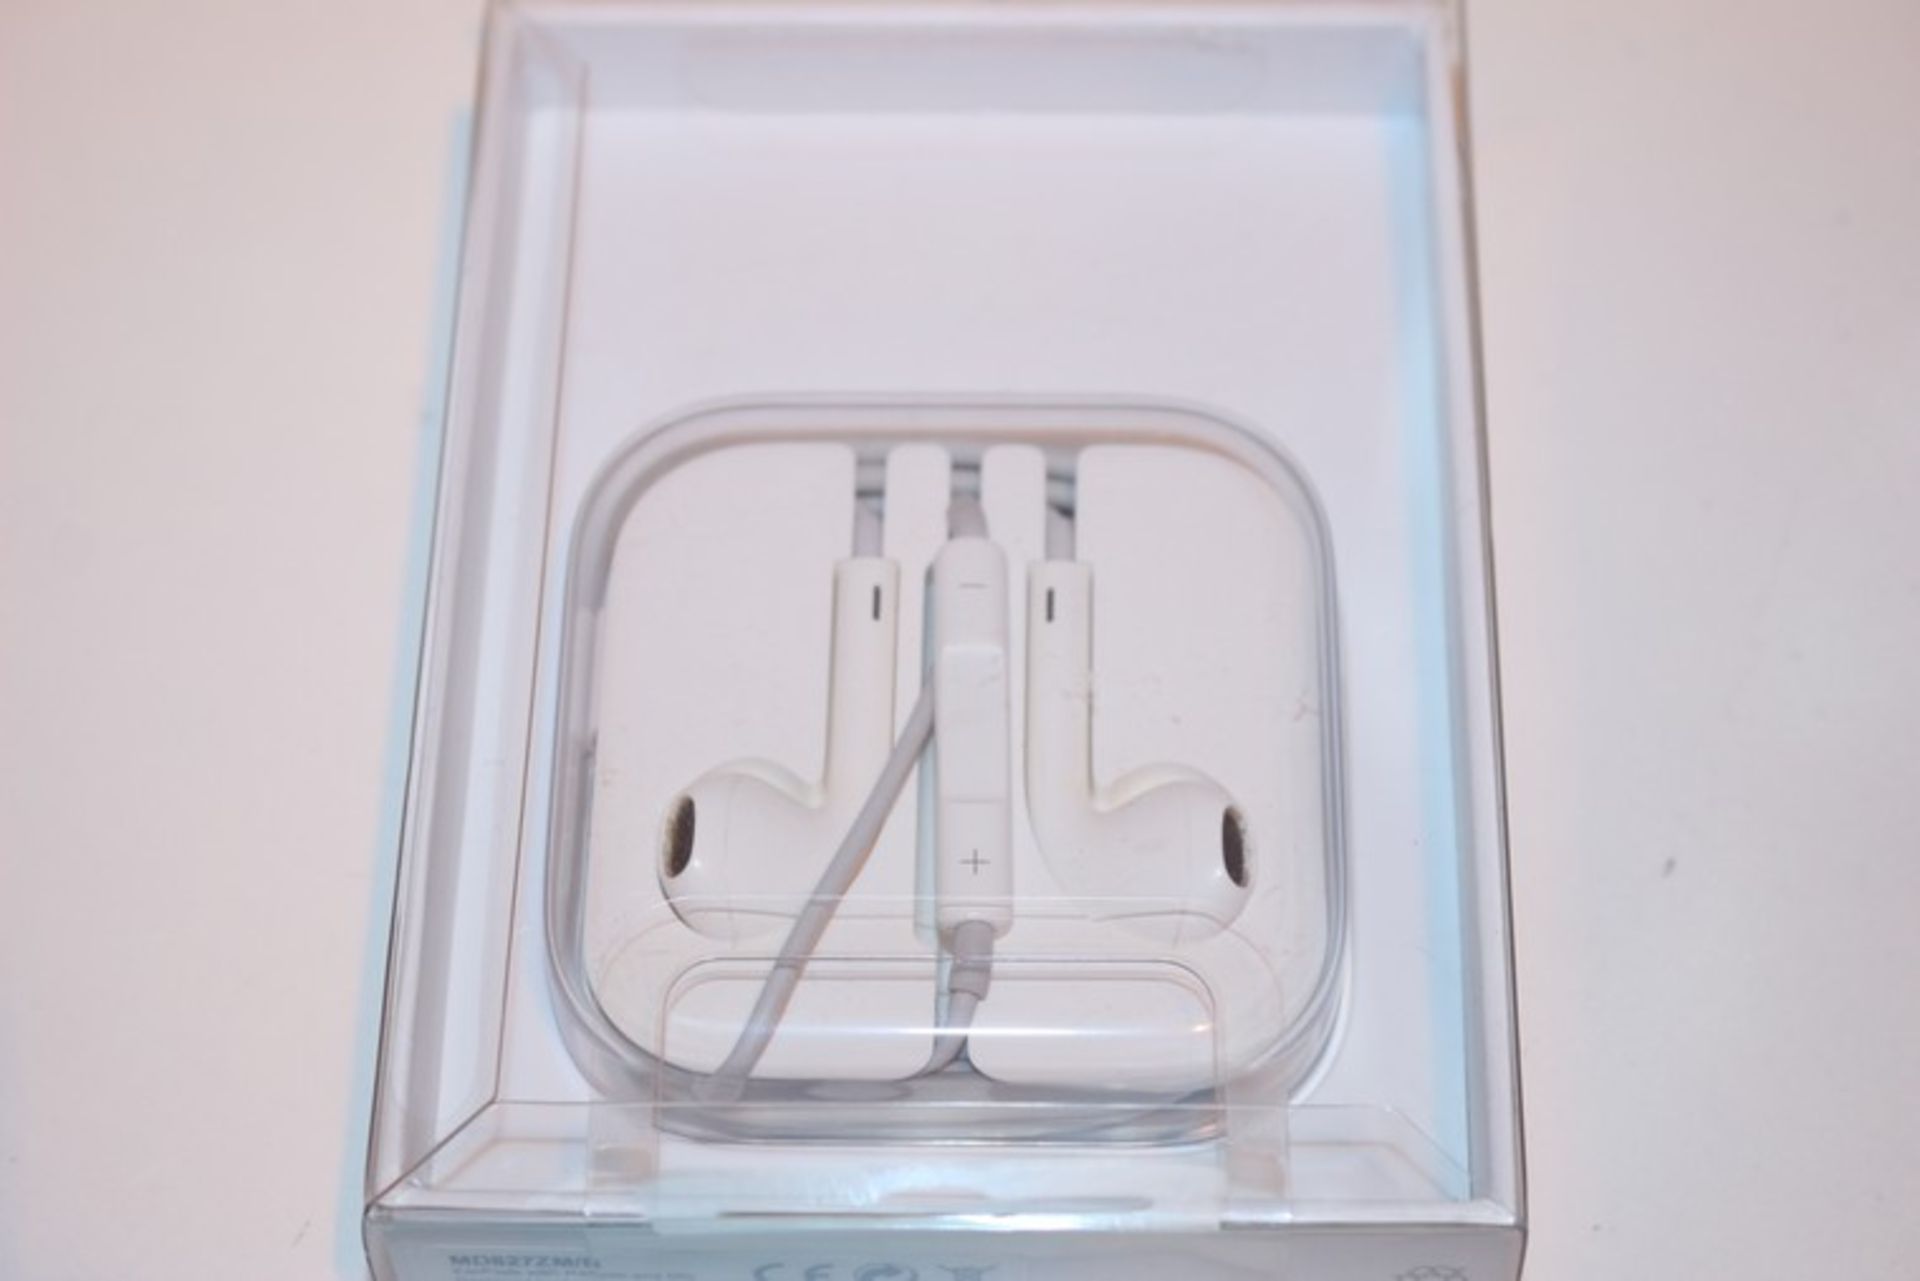 2 x BOXED PAIR OF APPLE EARPODS (18.7.17) *PLEASE NOTE THAT THE BID PRICE IS MULTIPLIED BY THE